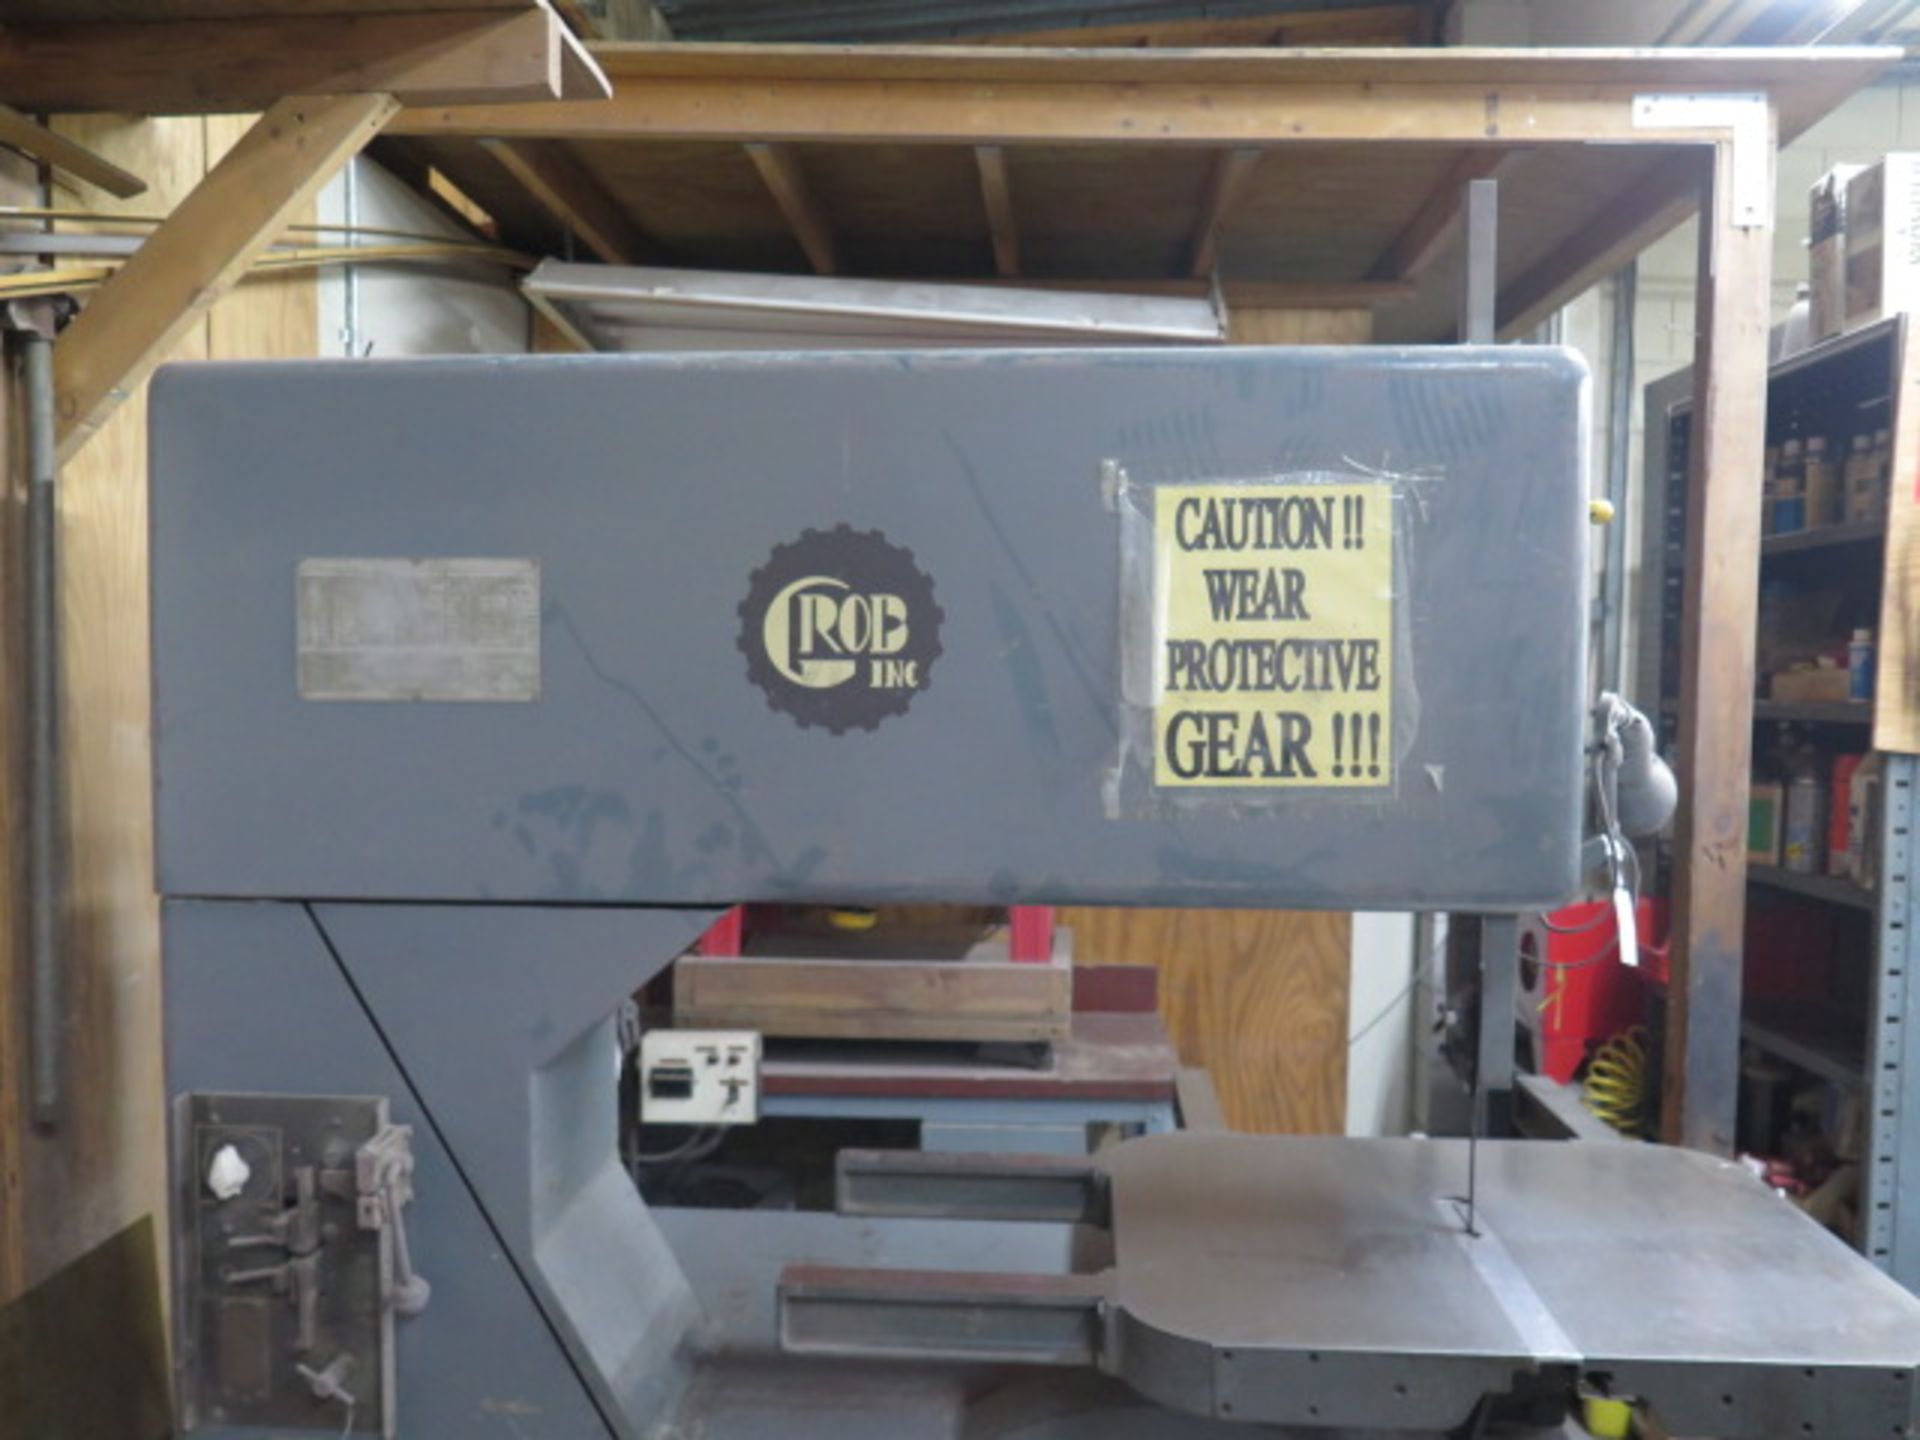 Grob NS36 36” Vertical Band Saw s/n 1029 w/ Blade Welder (SOLD AS-IS - NO WARRANTY) - Image 2 of 7